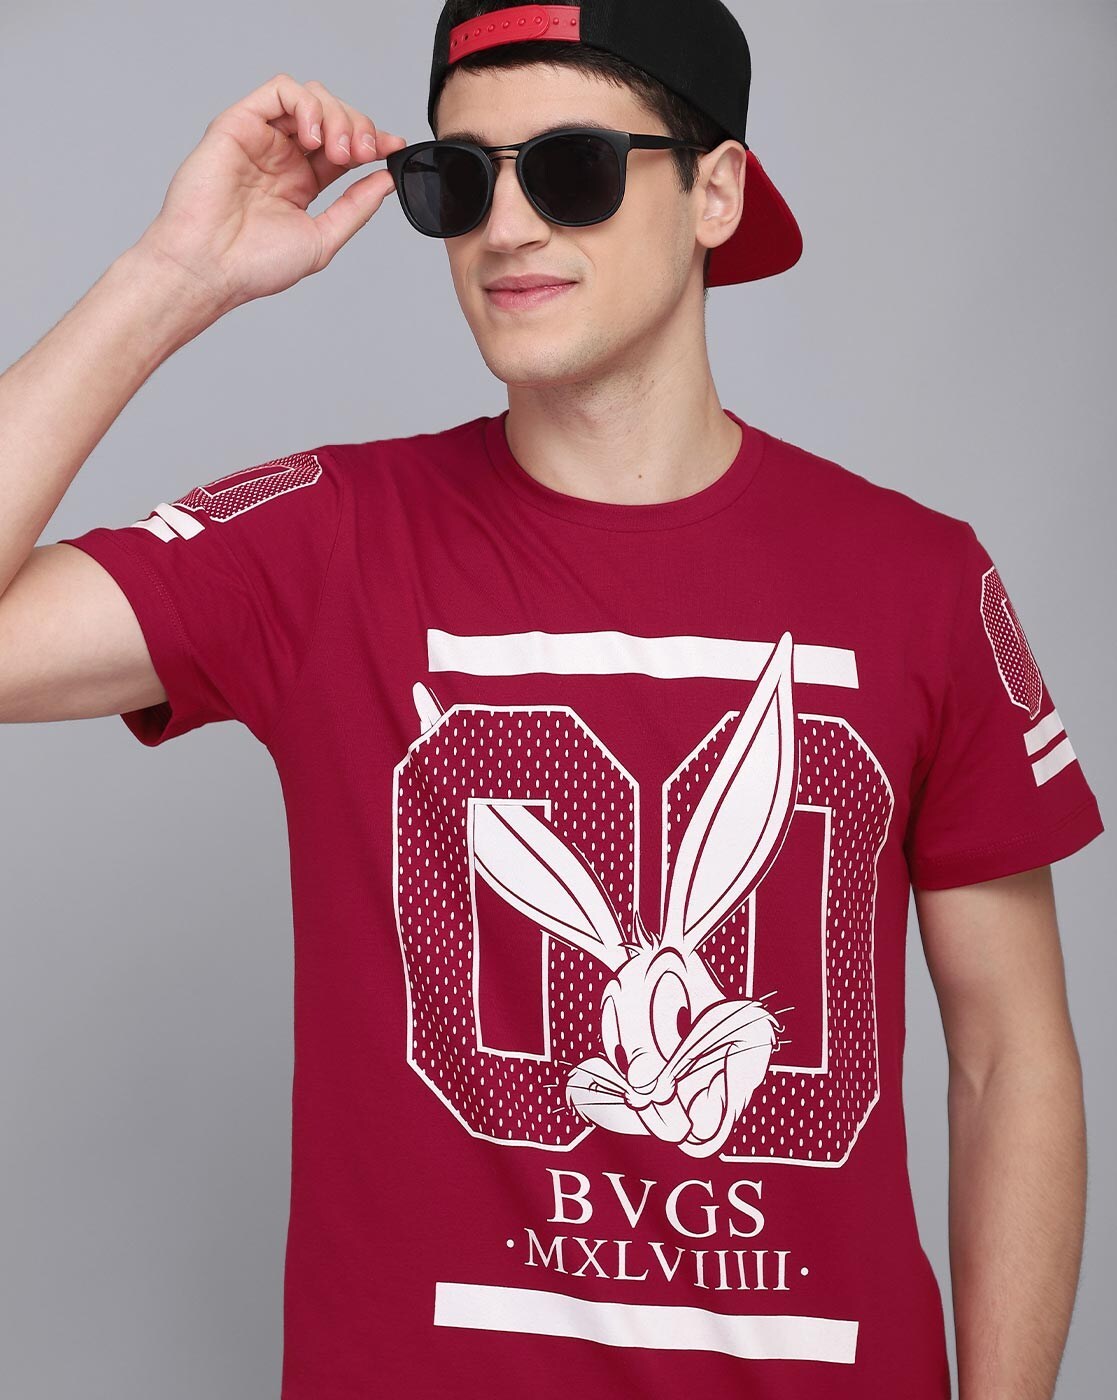 Buy Red Tshirts for Men by Free Authority Online